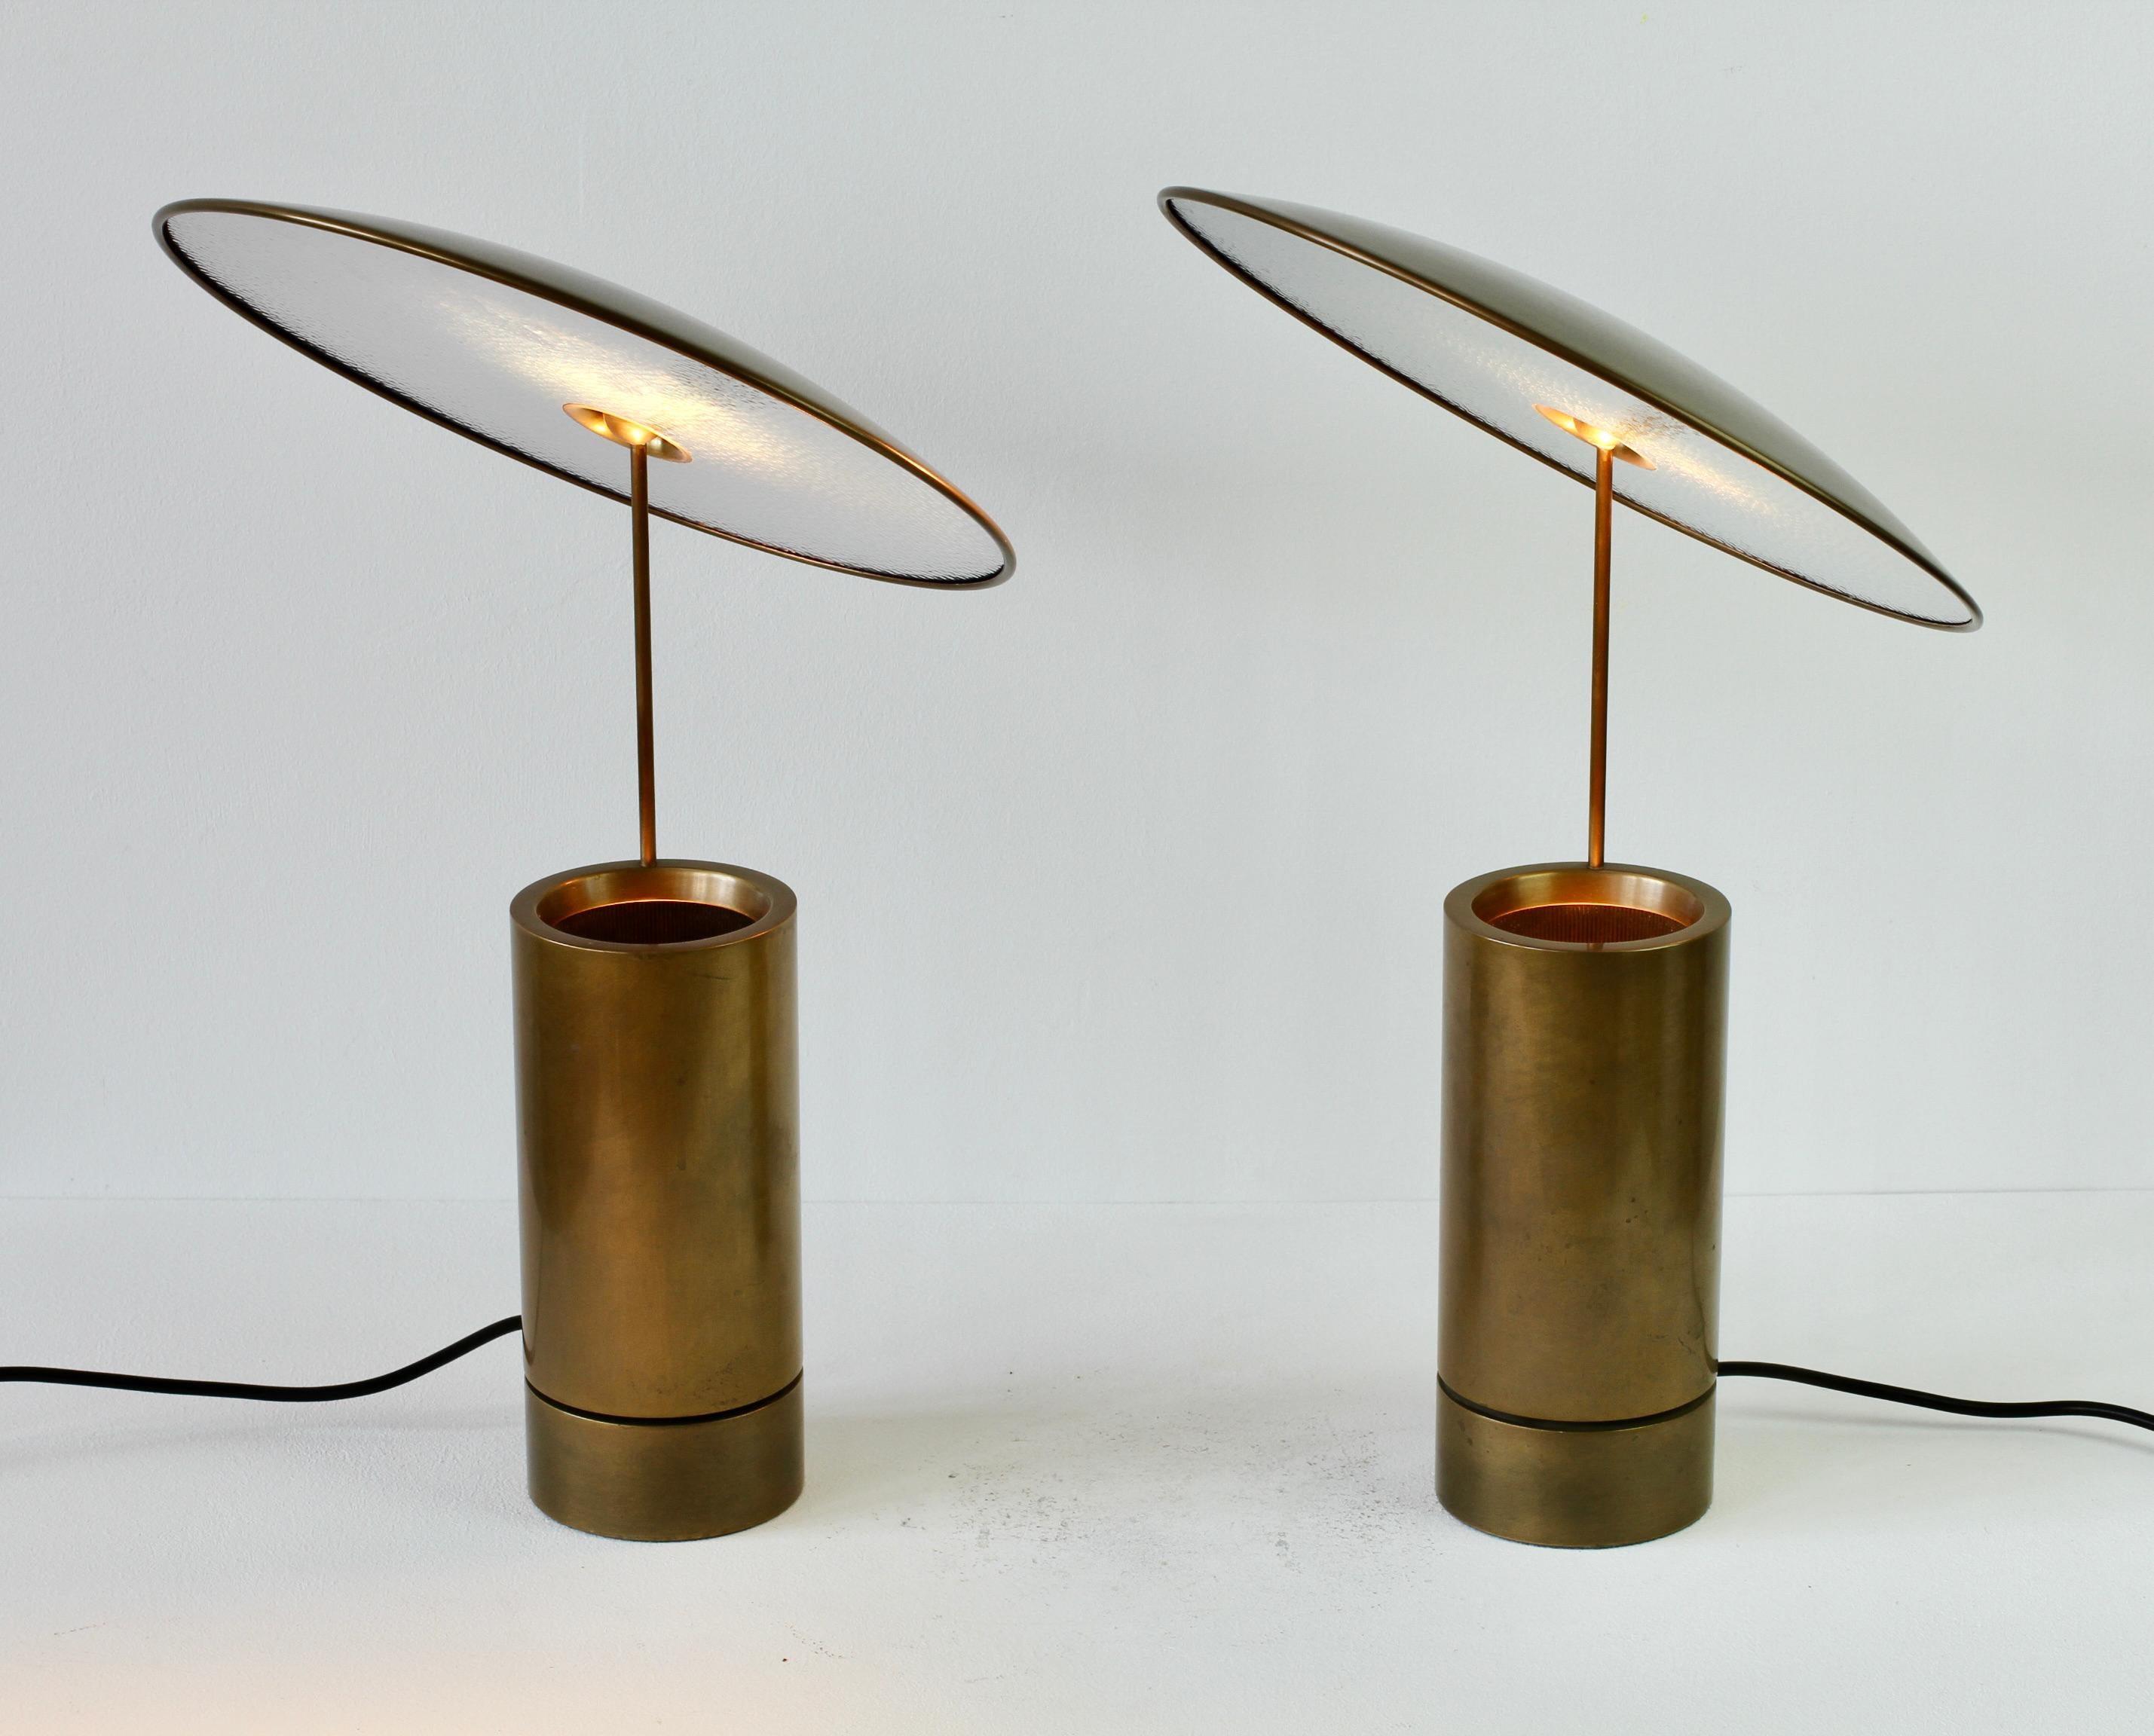 German Florian Schulz Rare Pair or 'TOS' Vintage Modernist Brushed Brass Table Lamps